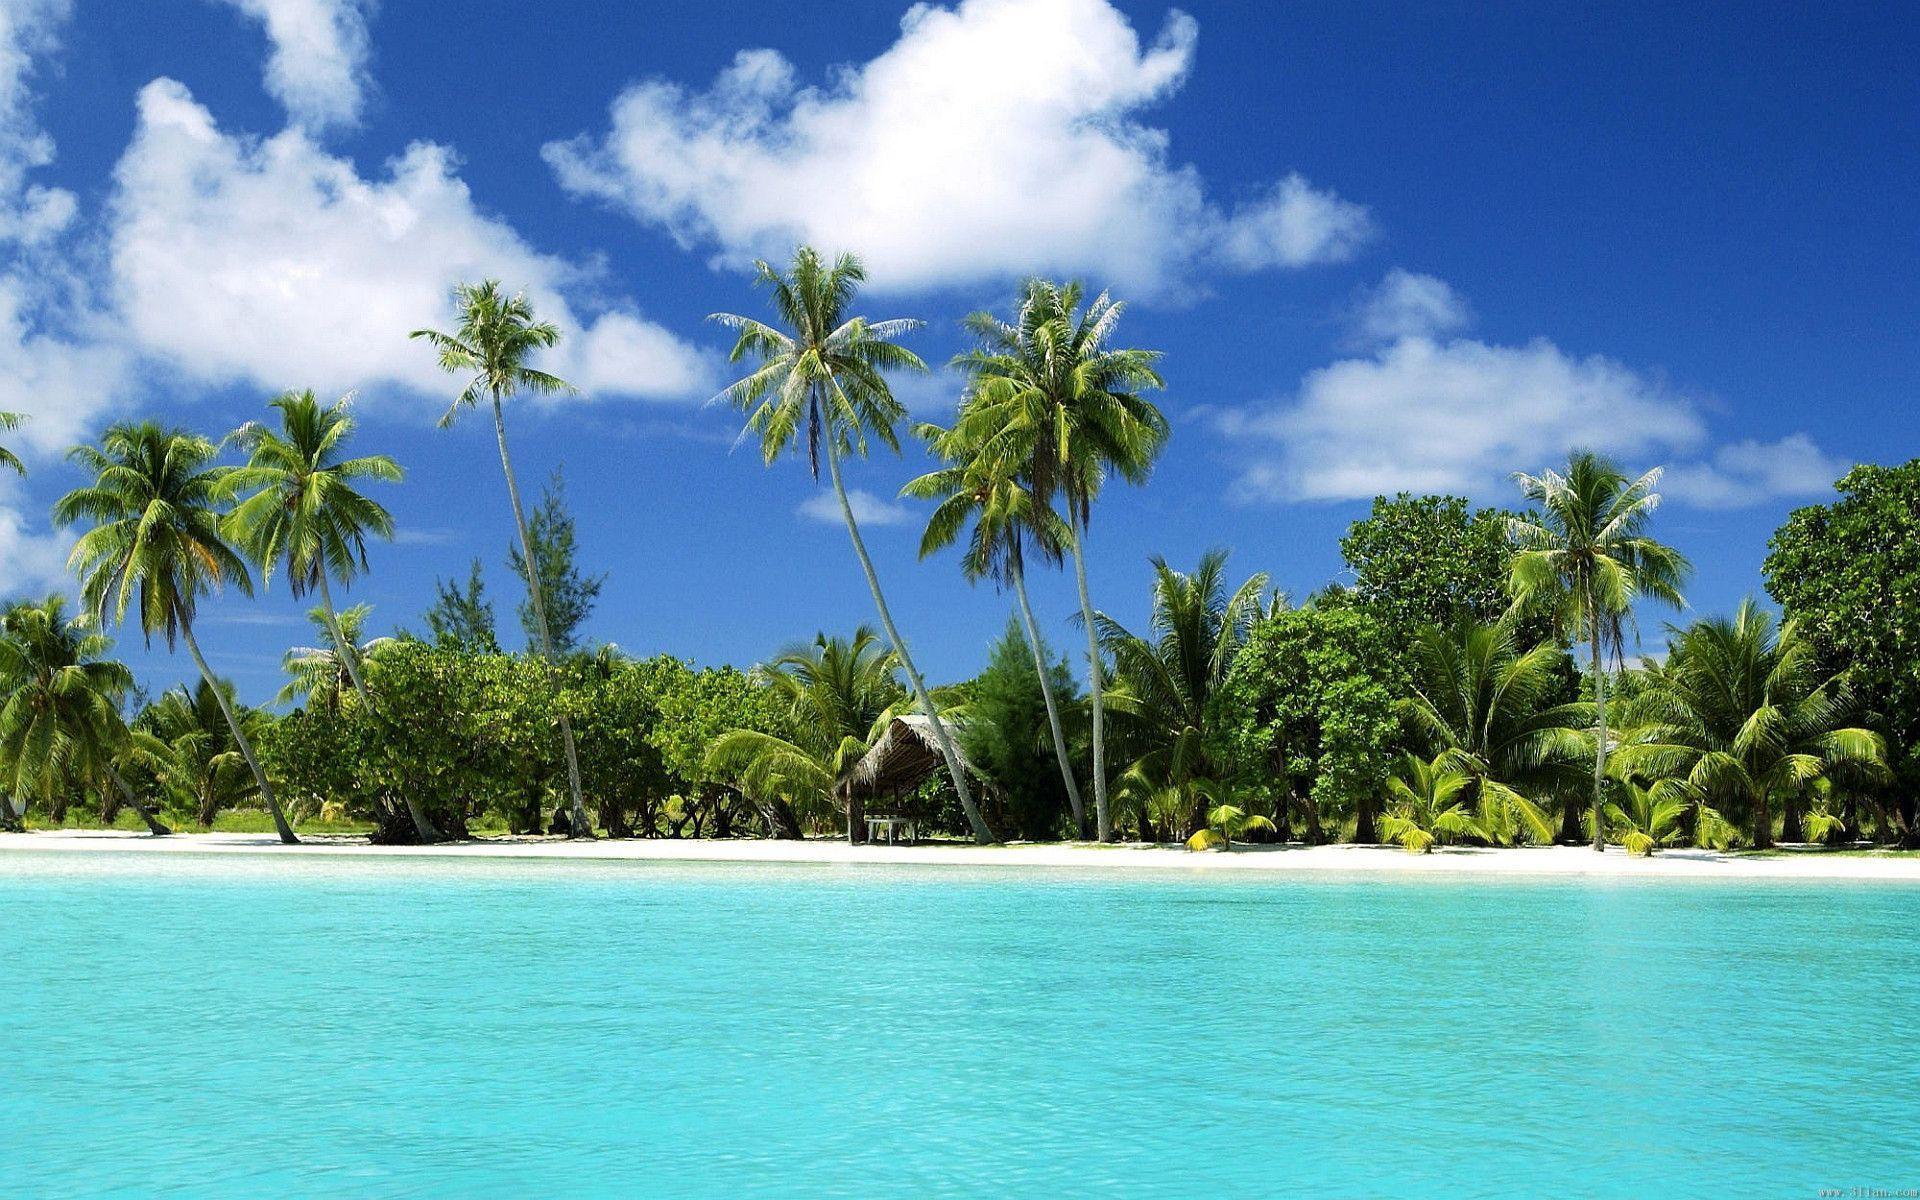 Tropical Beach Paradise Backgrounds 21195 Hd Wallpapers in Beach n